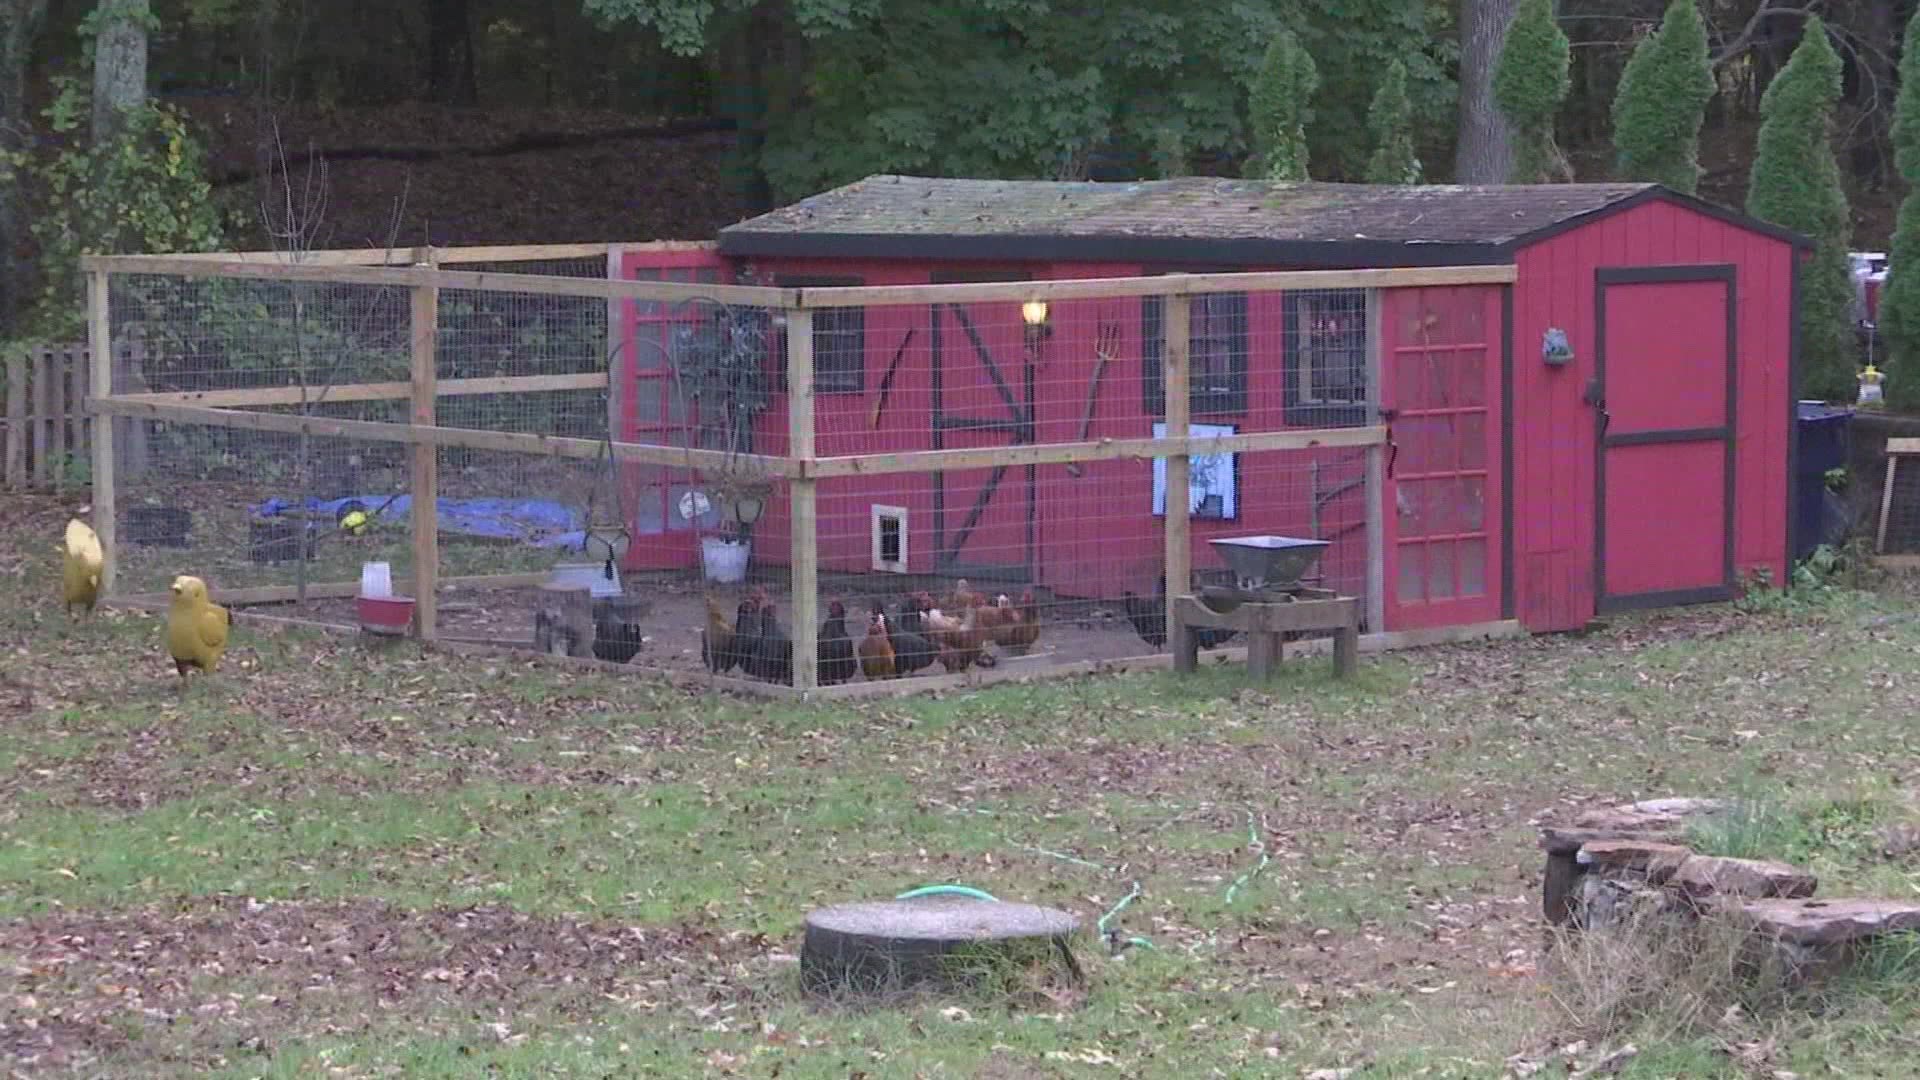 A Rhode Island community stepped up big to help the owner of an egg stand who had all his supplies and money stolen.